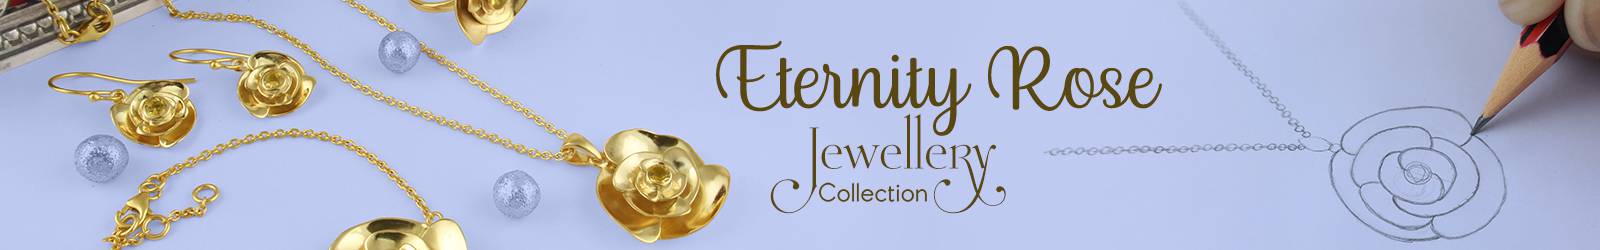 Eternity Rose Silver Jewelry Collection Manufacturer, Supplier, Store in Jaipur